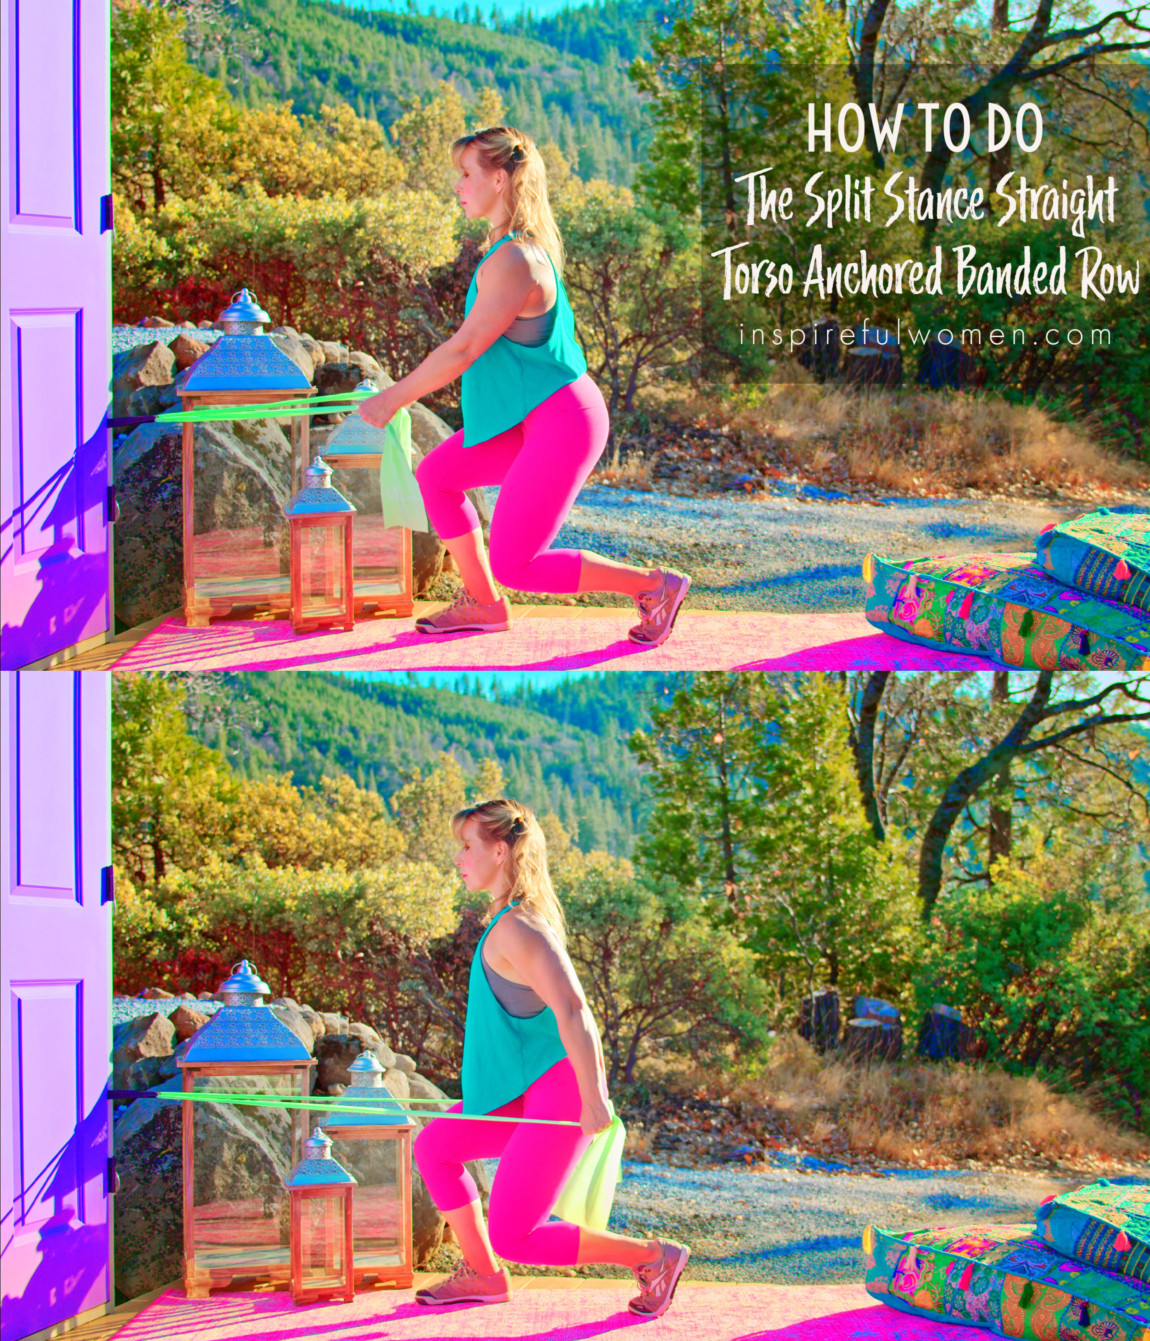 how-to-do-split-stance-upright-torso-anchored-banded-row-lat-latissimus-dorsi-exercise-at-home